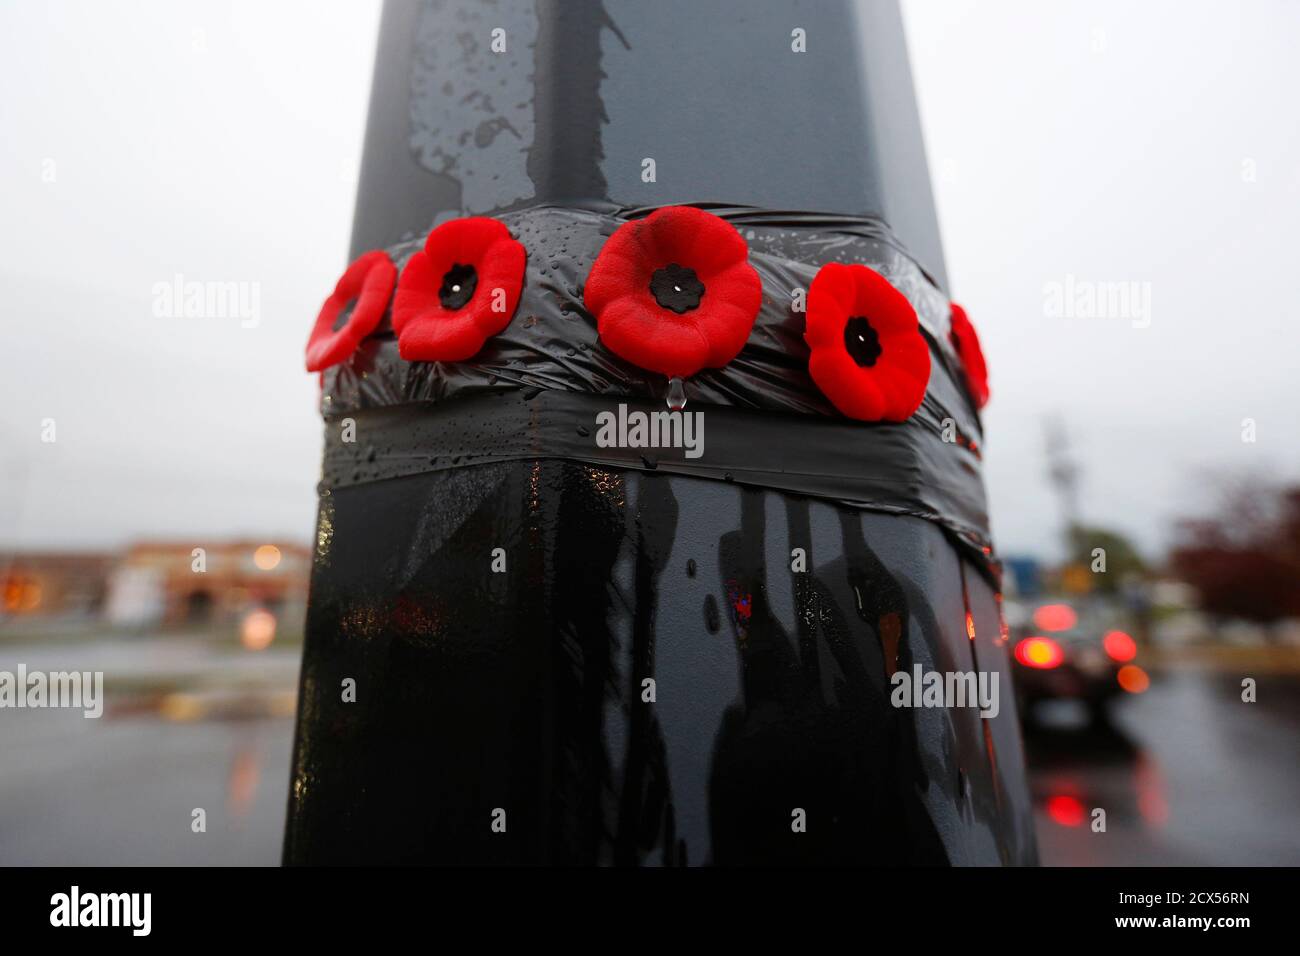 A raindrop falls from one of the poppies placed on a lamp post in the  parking lot in front of a Service Canada building, where a suspected  Islamic militant deliberately ran over